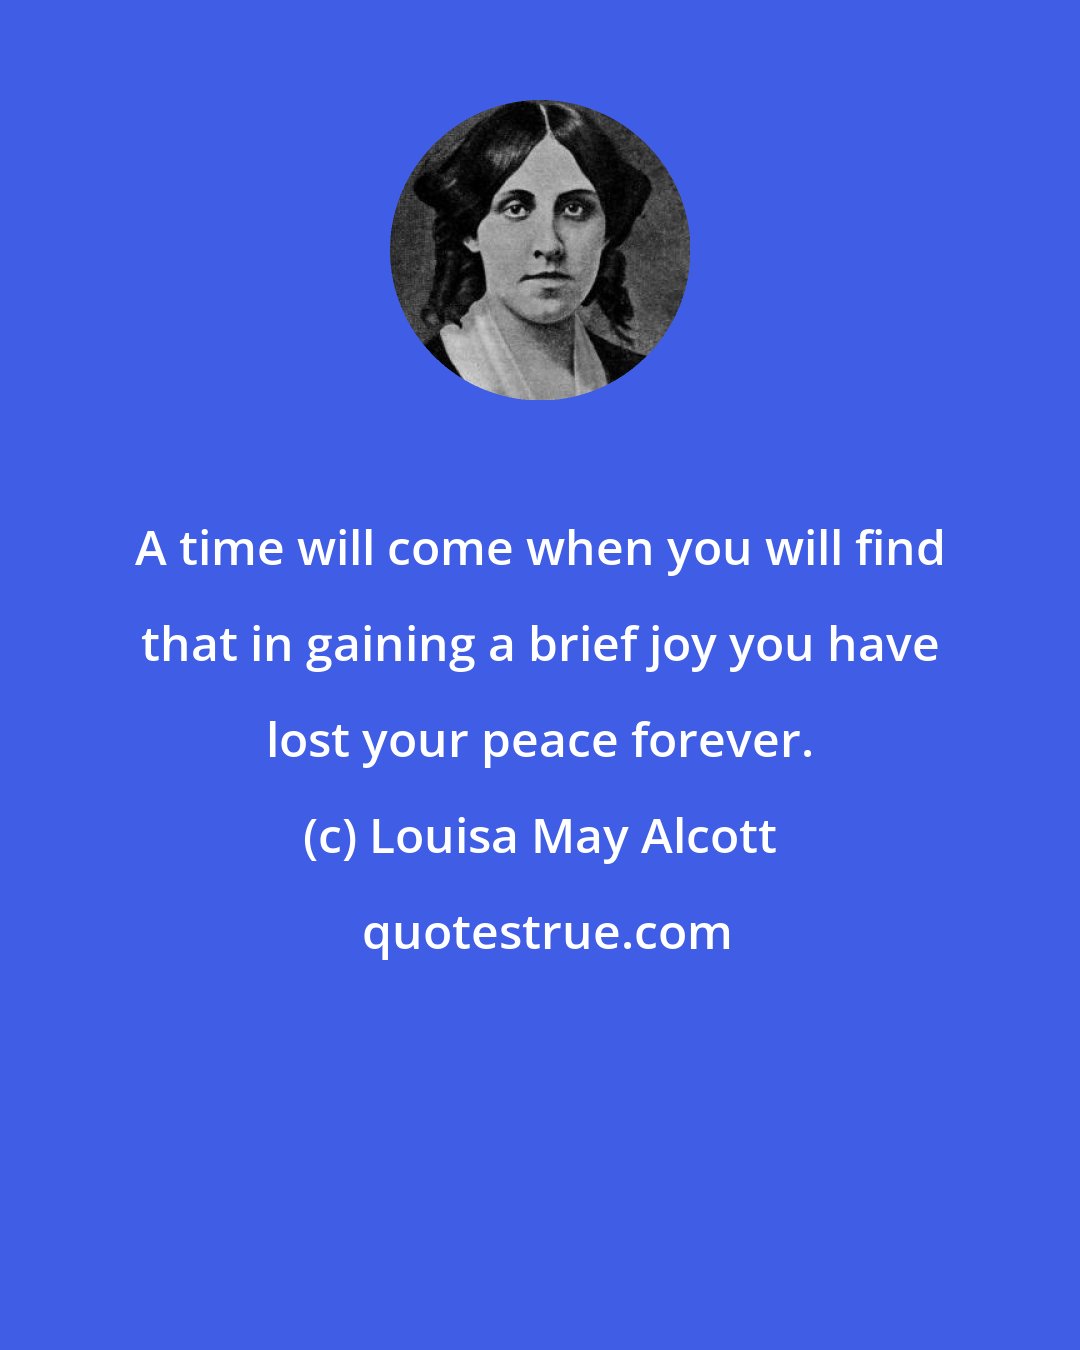 Louisa May Alcott: A time will come when you will find that in gaining a brief joy you have lost your peace forever.